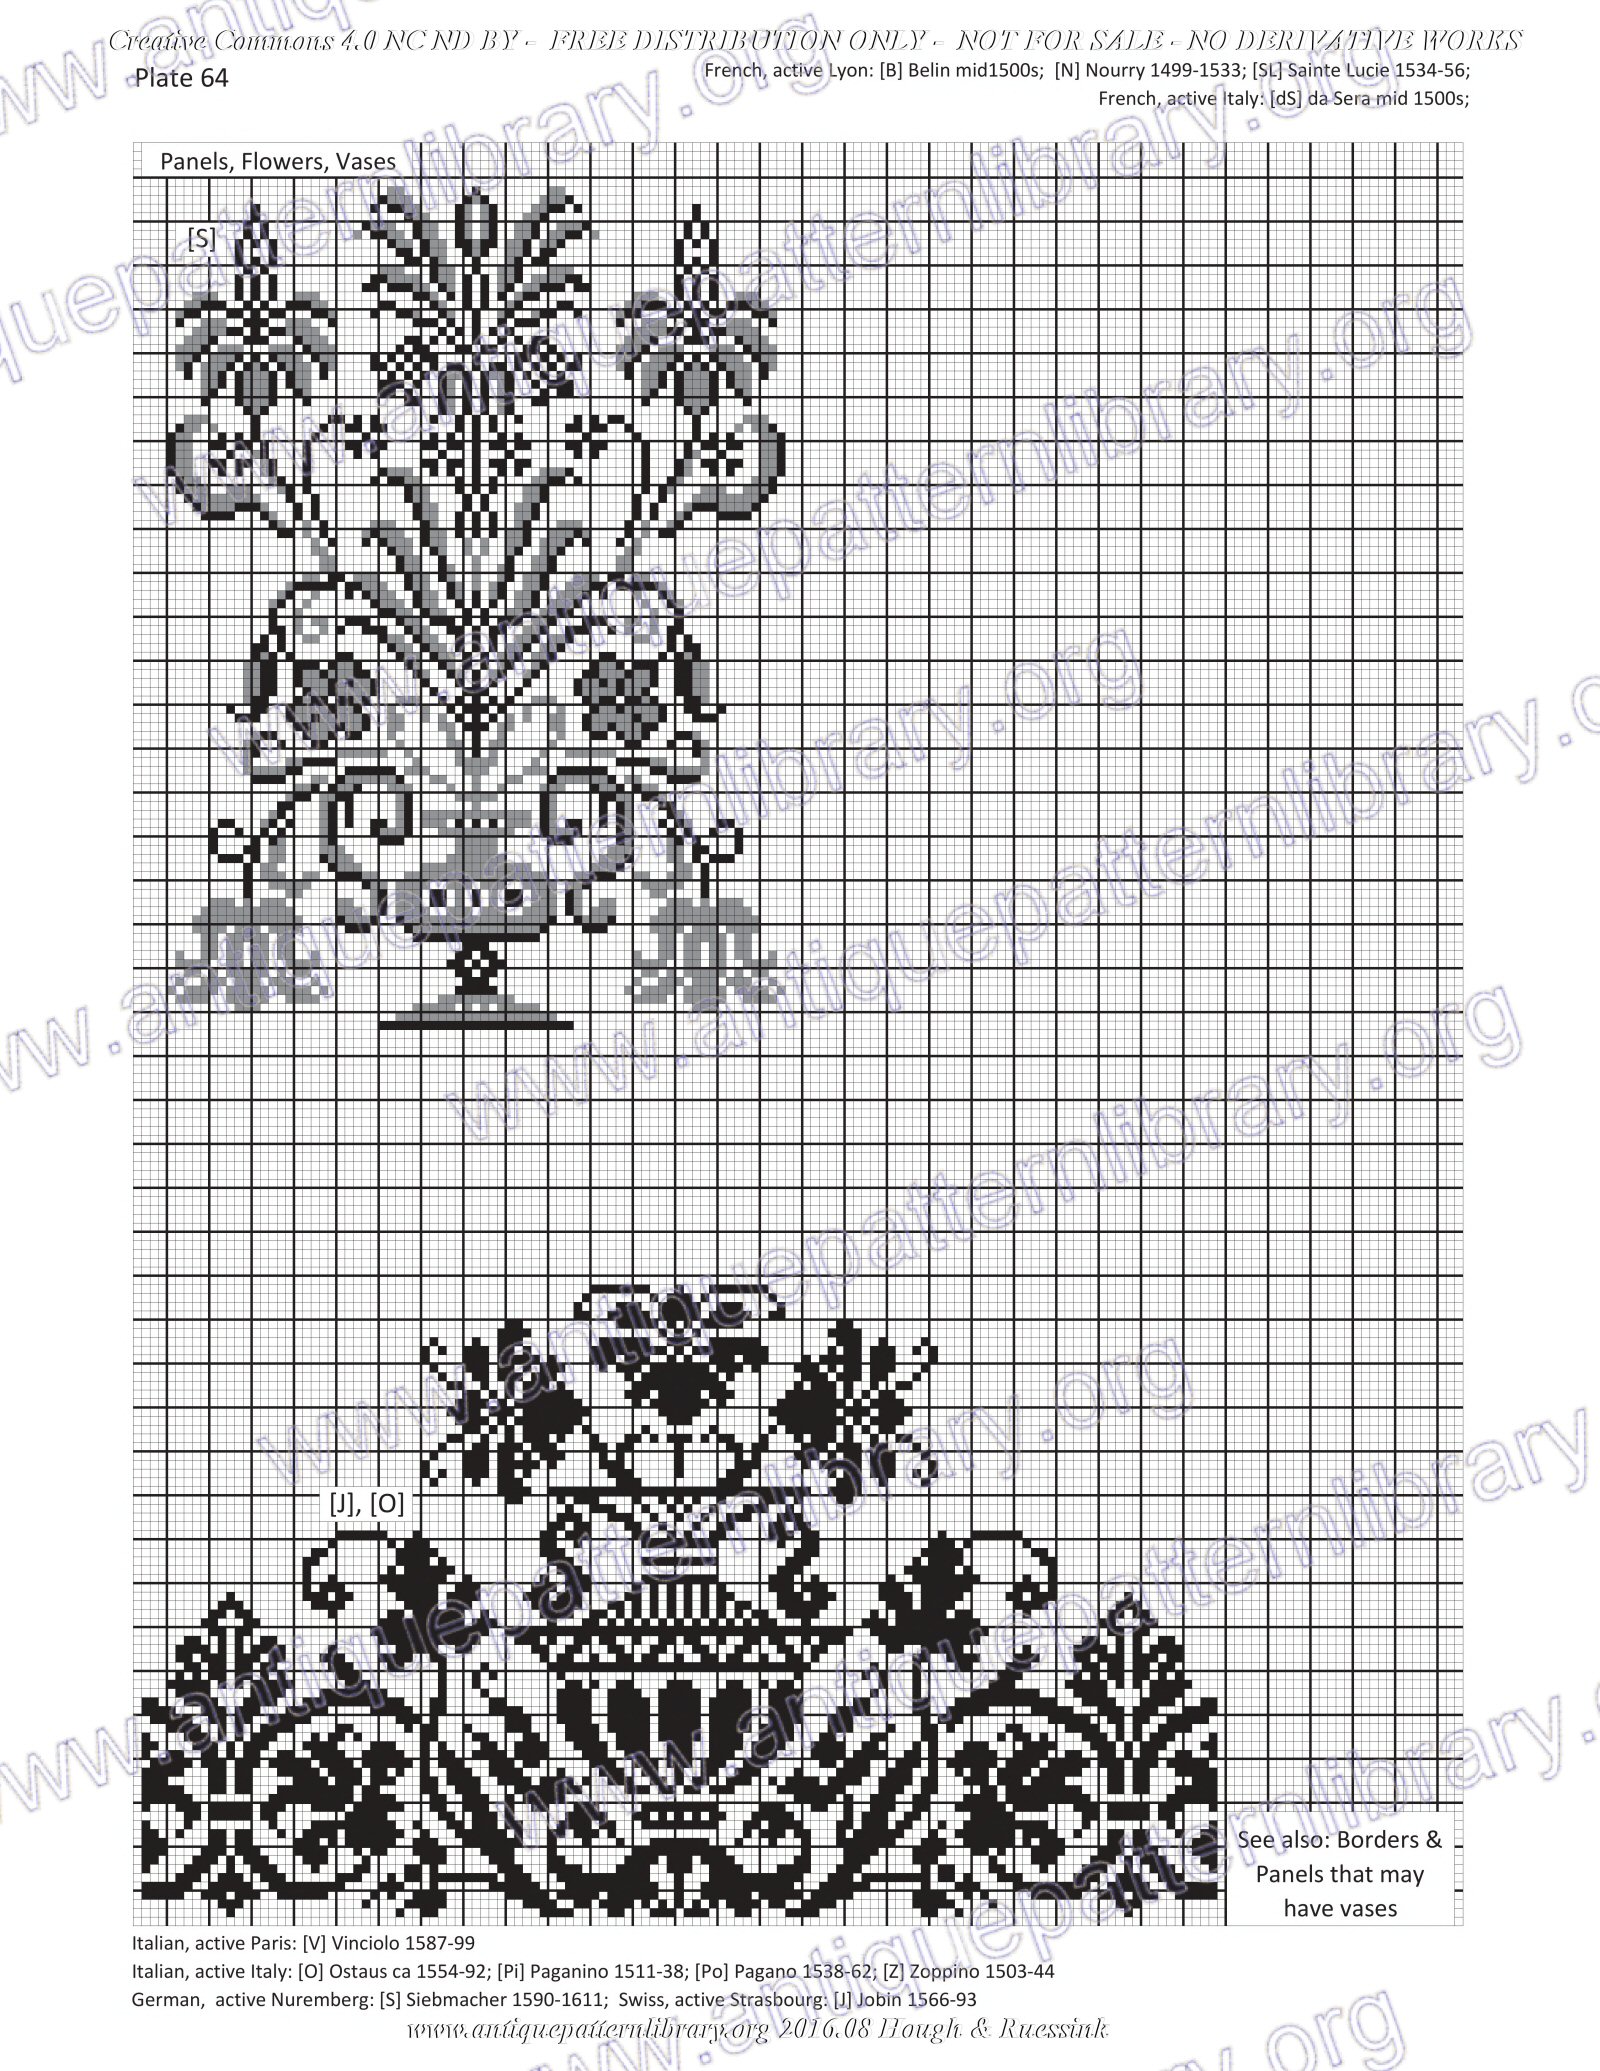 G-HH001 Design Elements of Renaissance Embroidery
No derivative use allowed